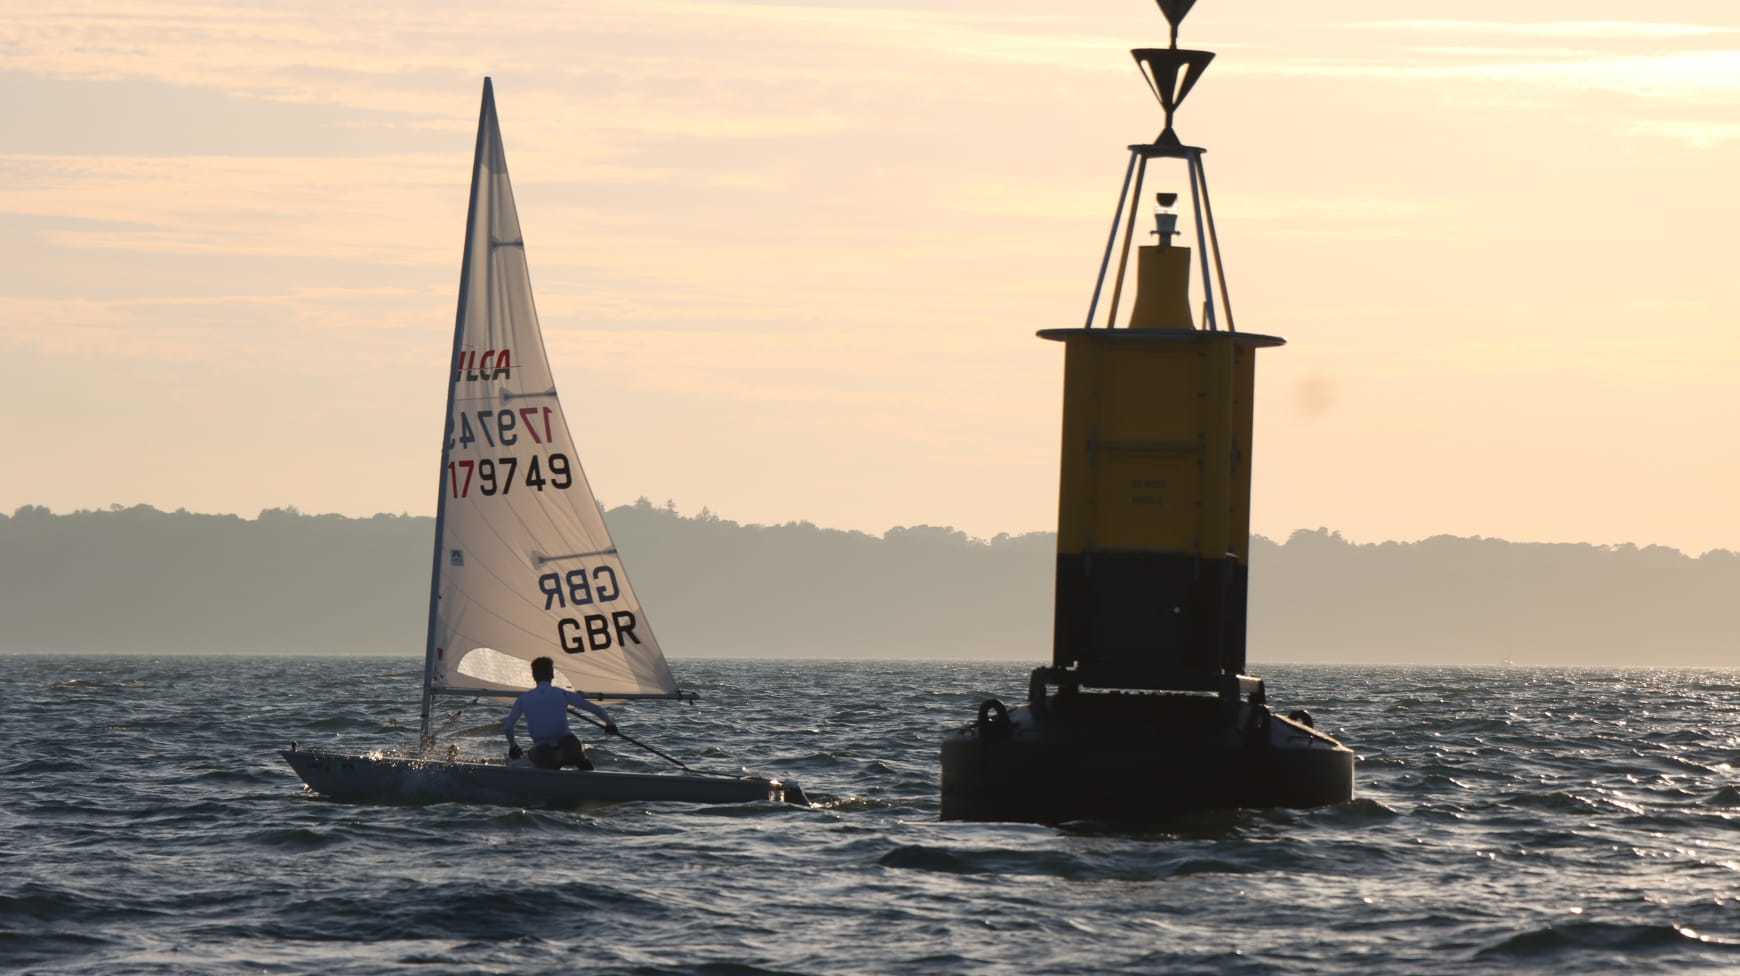 Harry Whites solo sailing world record attempt. 